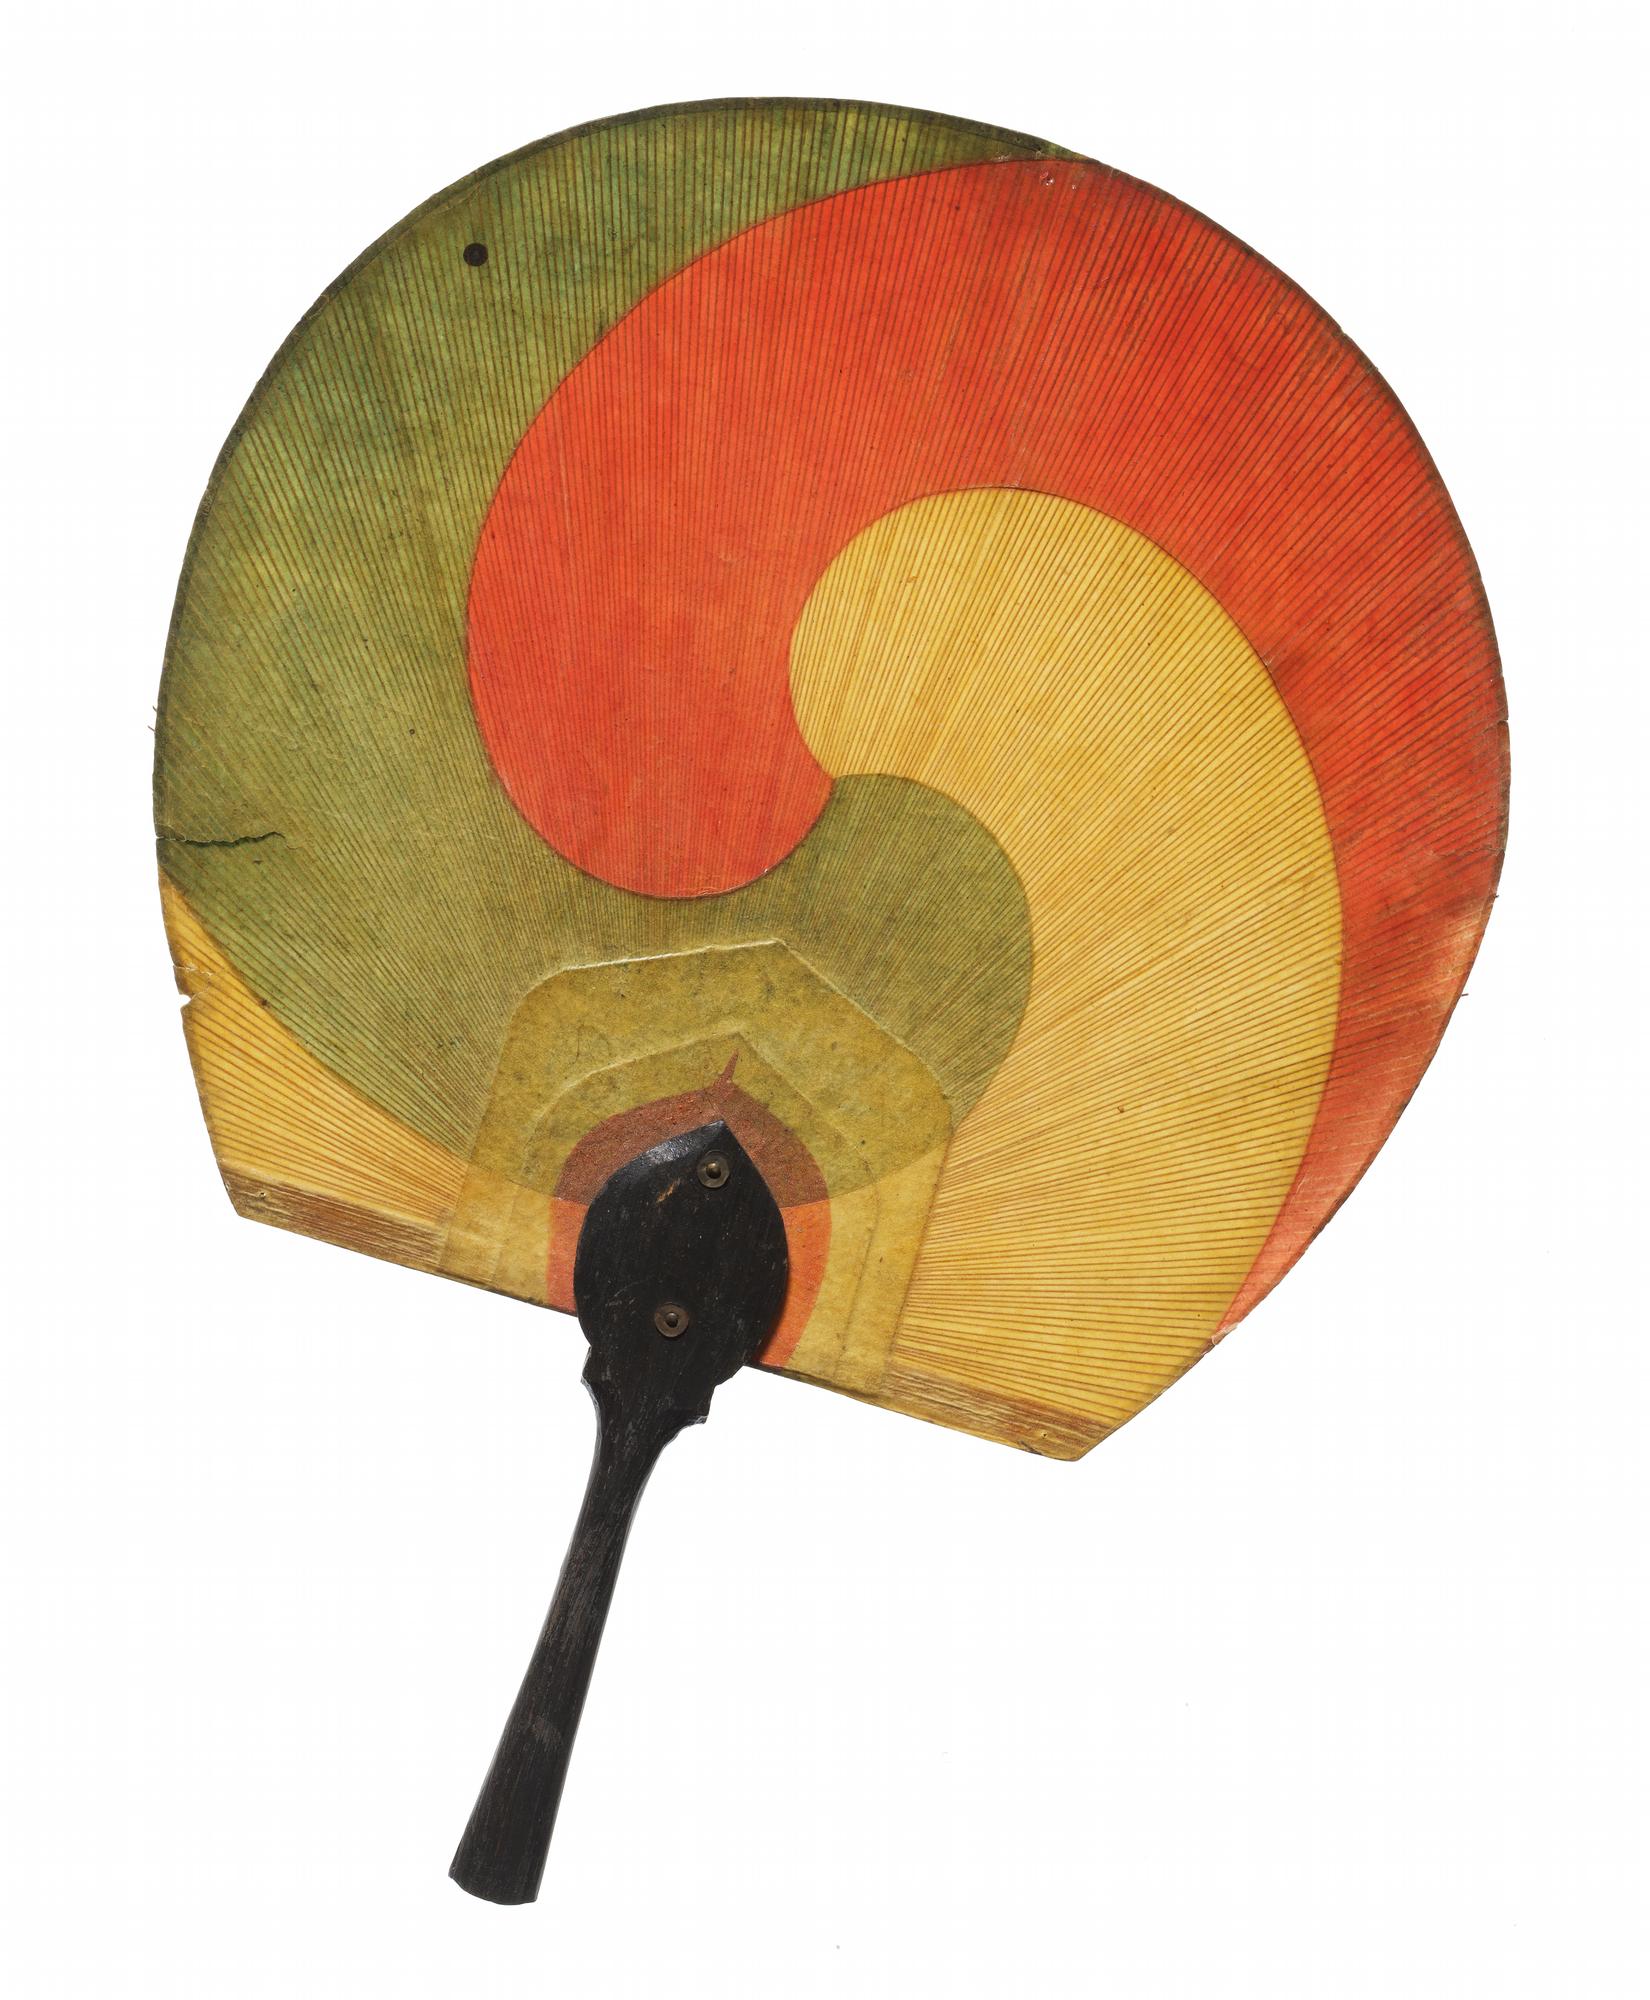 Woman's fan (taegeukseon) made of paper and lacquered wood, with good luck symbol: Korea, 1890-1905.